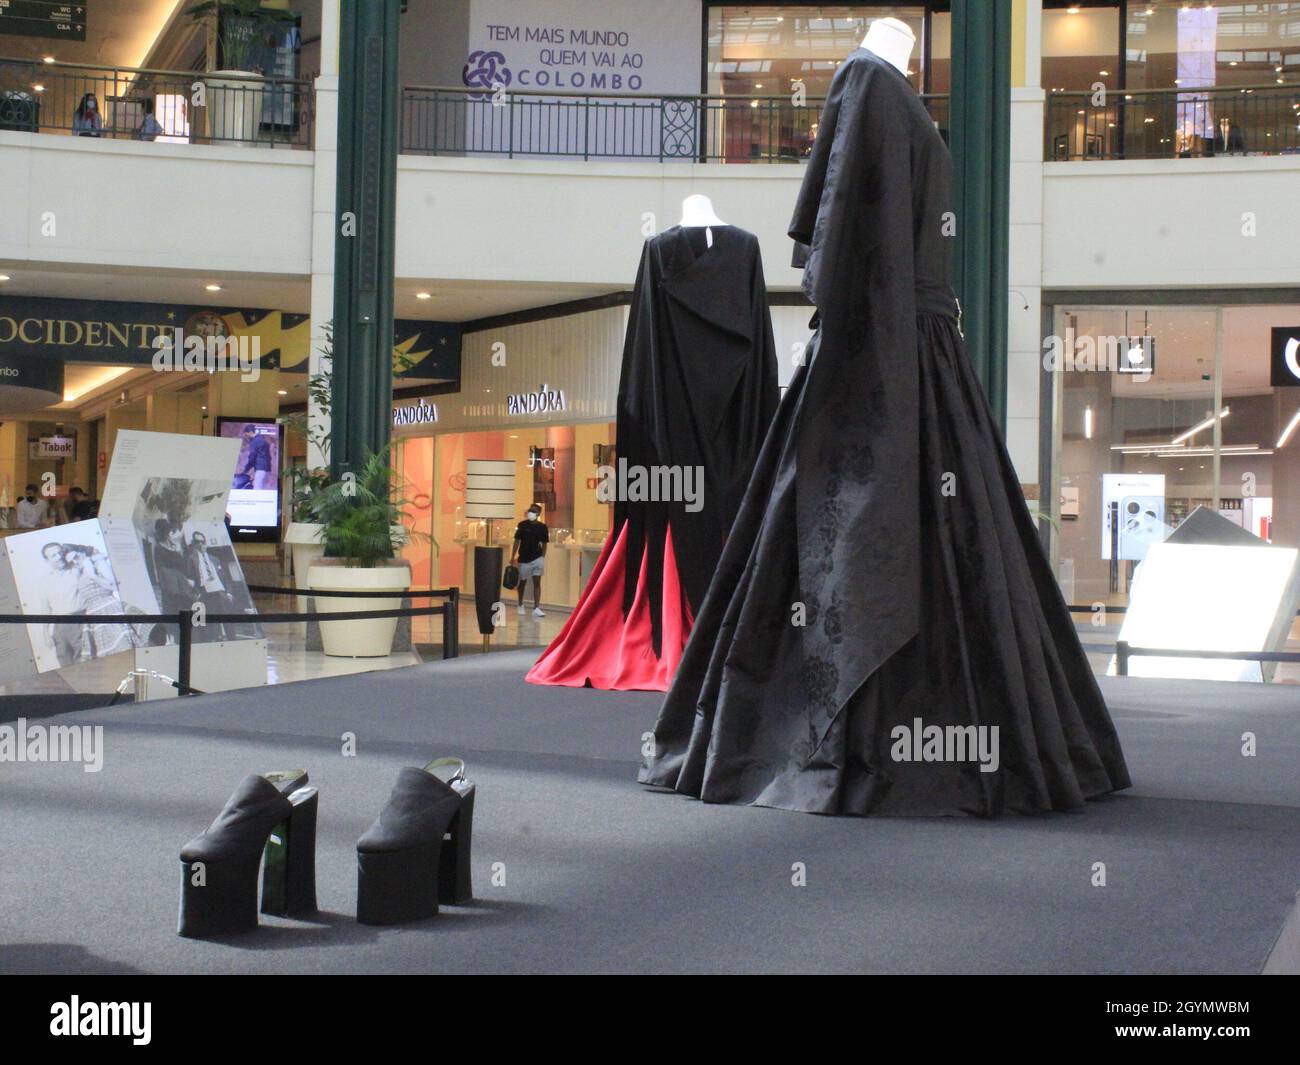 Lisbon, Portugal. 8th Oct, 2021. (INT) Exhibition of clothes by fado singer  Amalia Roderigues at the Colombo shopping mall in Lisbon. Oct 8, 2021,  Lisbon, Portugal: Clothes used by Portuguese singer, actress